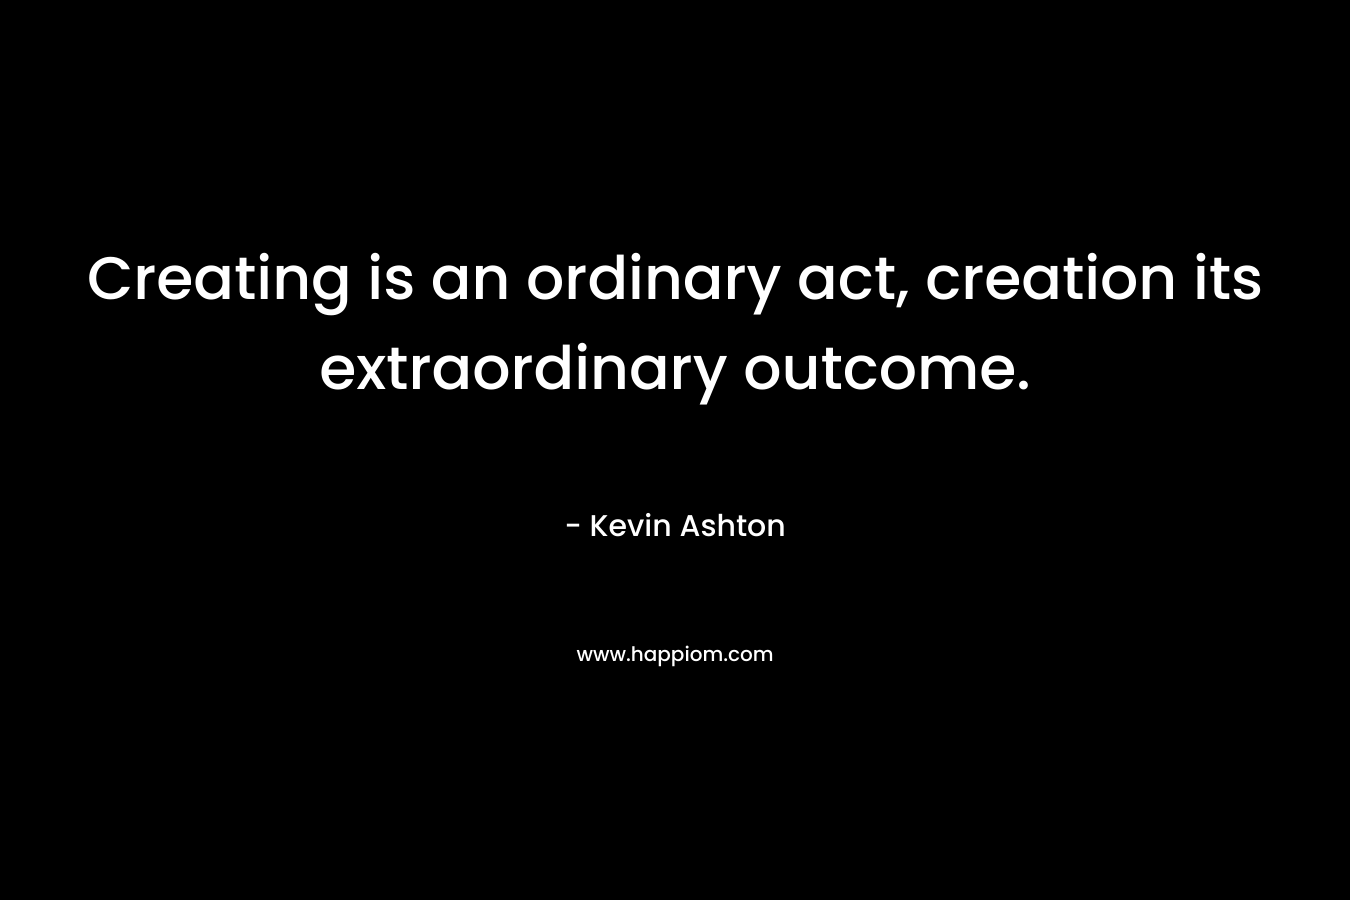 Creating is an ordinary act, creation its extraordinary outcome.